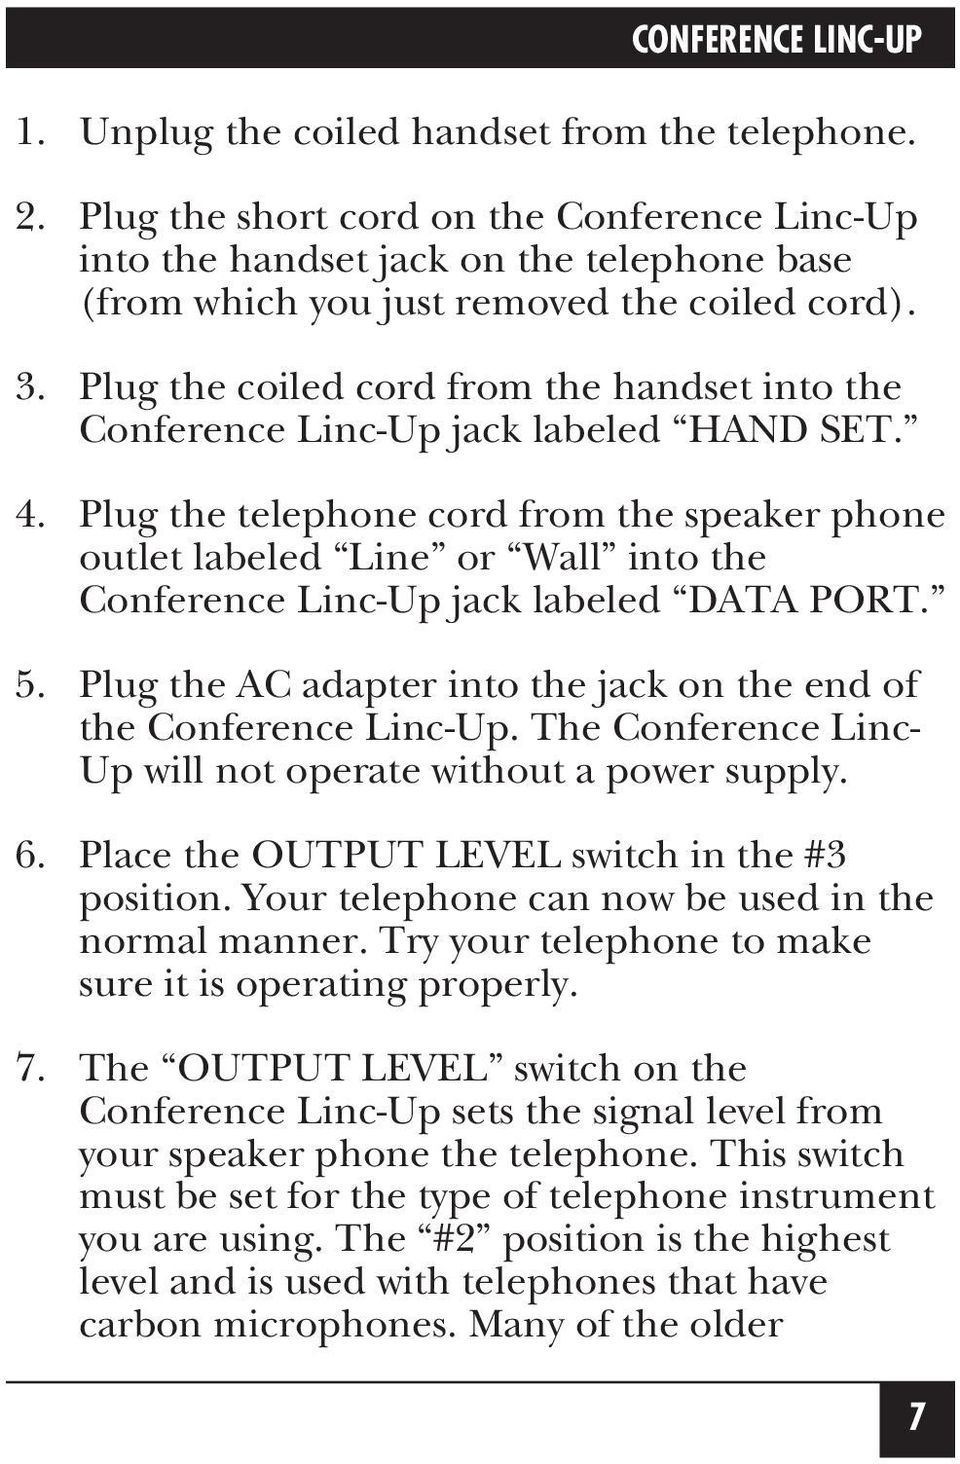 Plug the telephone cord from the speaker phone outlet labeled Line or Wall into the Conference Linc-Up jack labeled DATA PORT. 5.